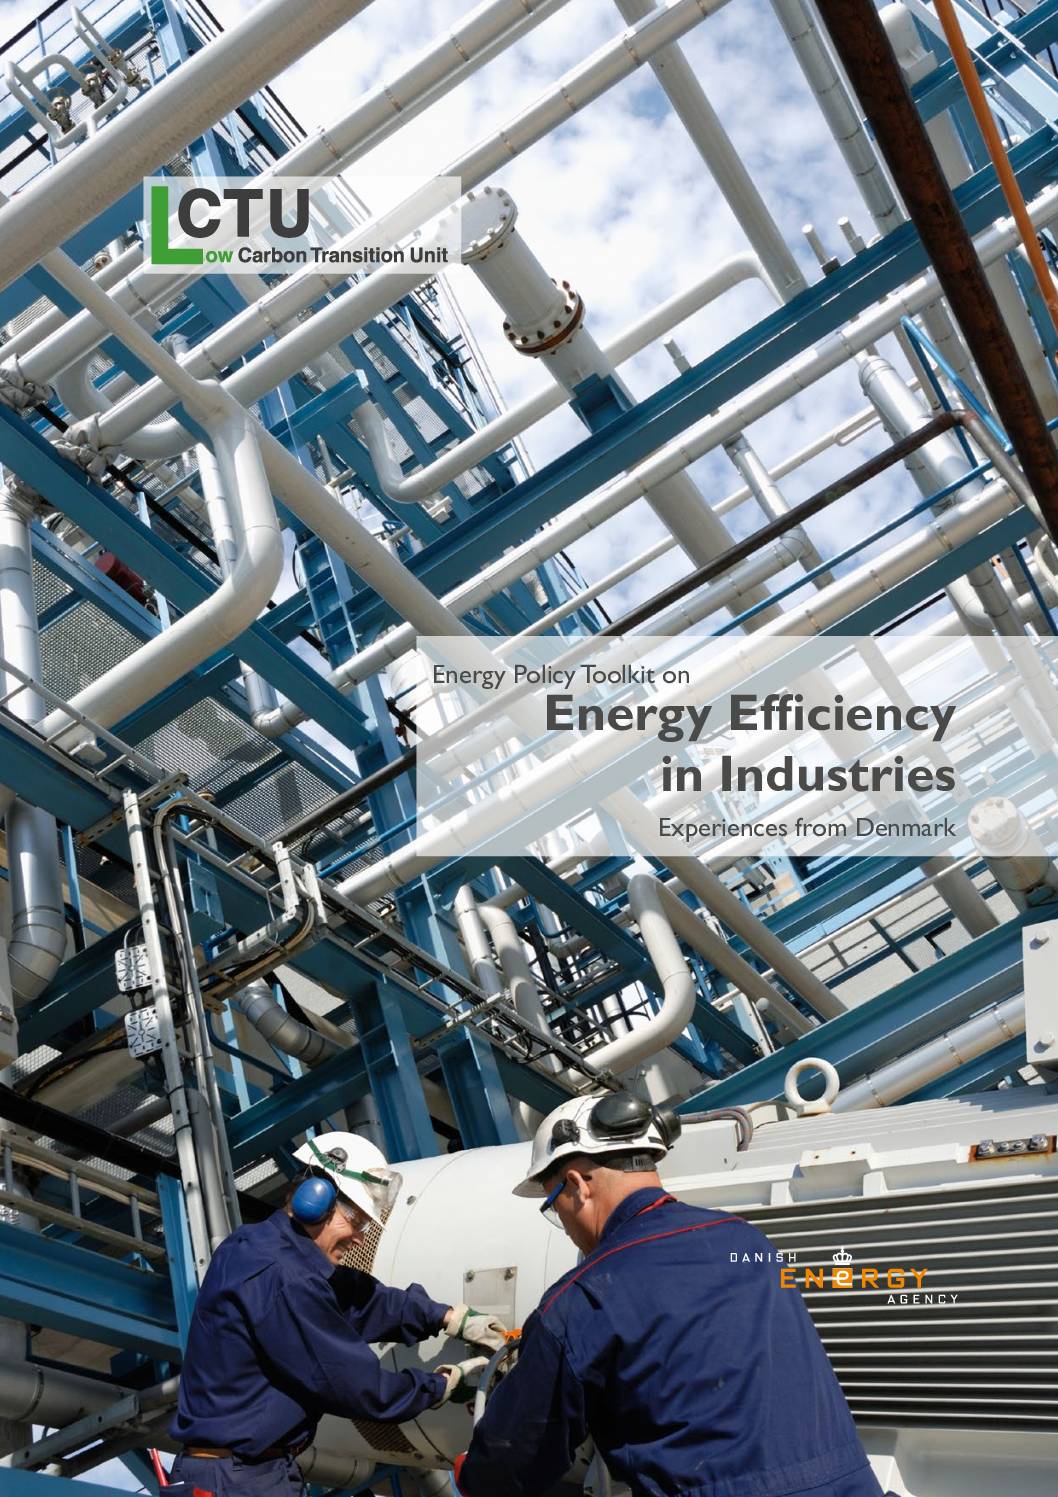 Energy Policy Toolkit on Energy Efficiency in Industries – Experiences from Denmark